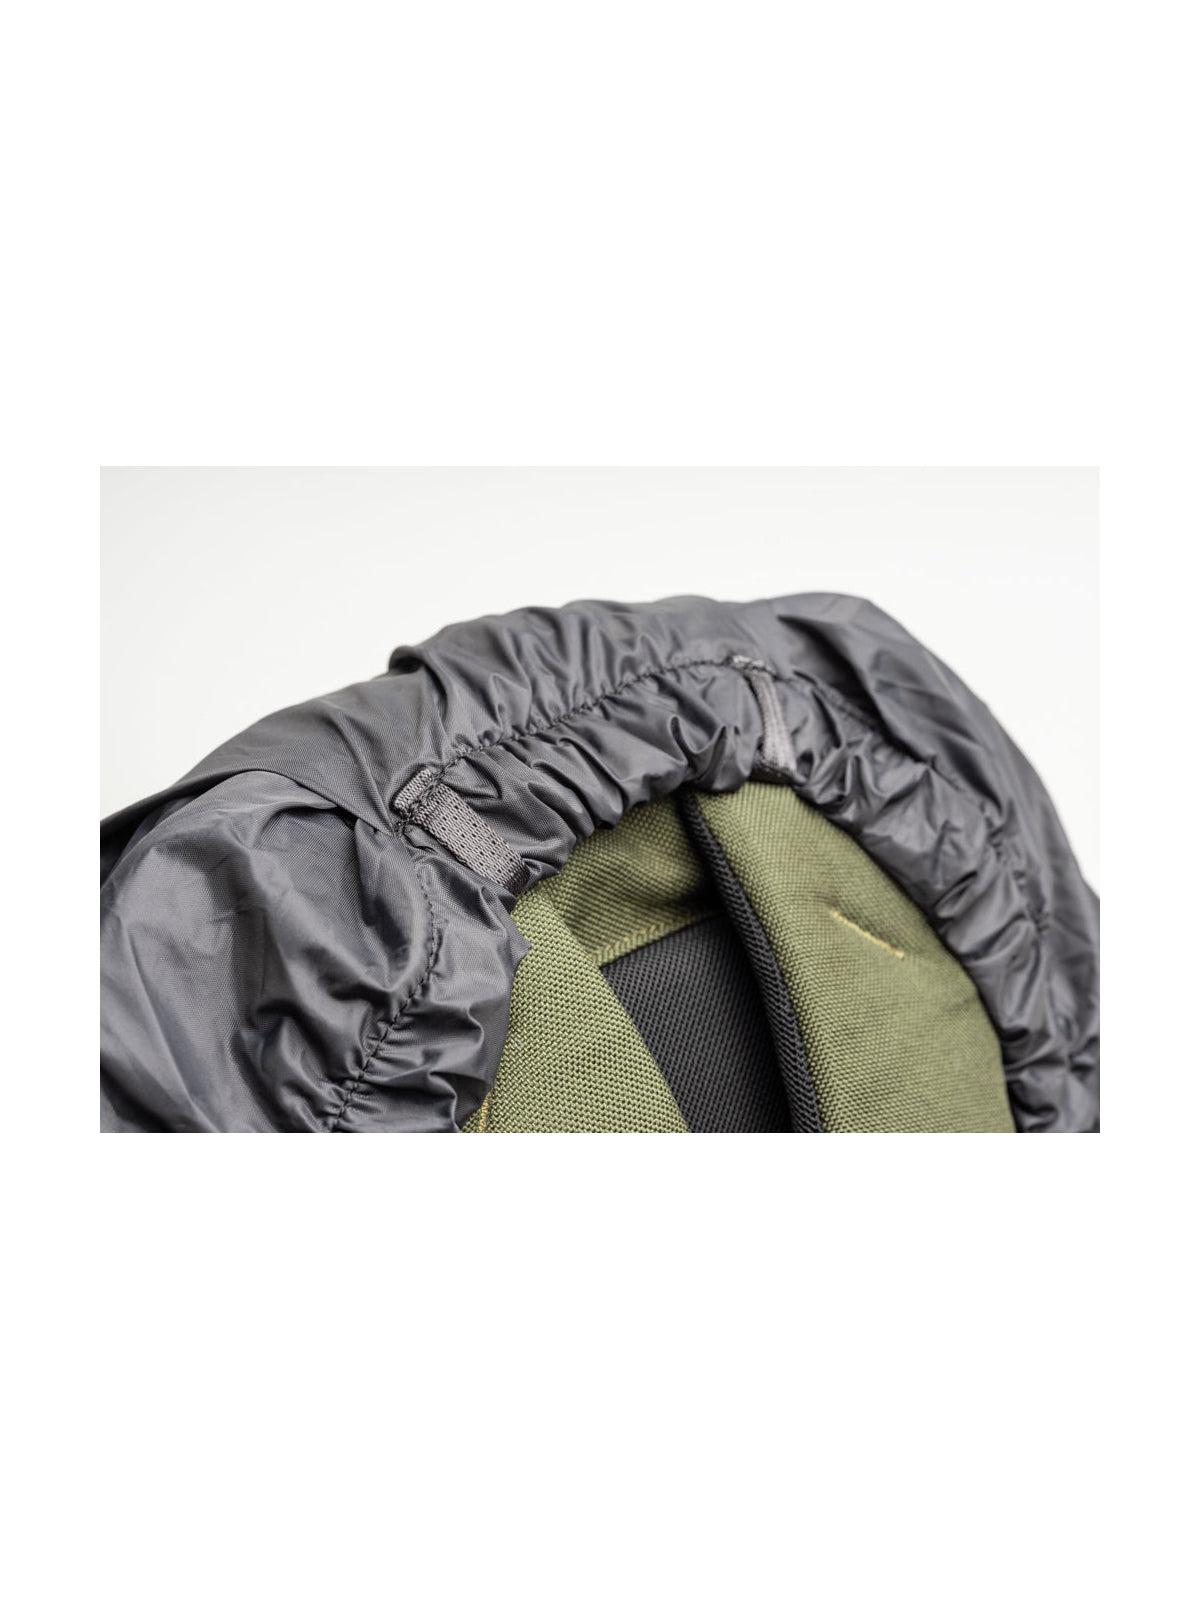 Able Carry Rain Cover for Thirteen Daybag Charcoal